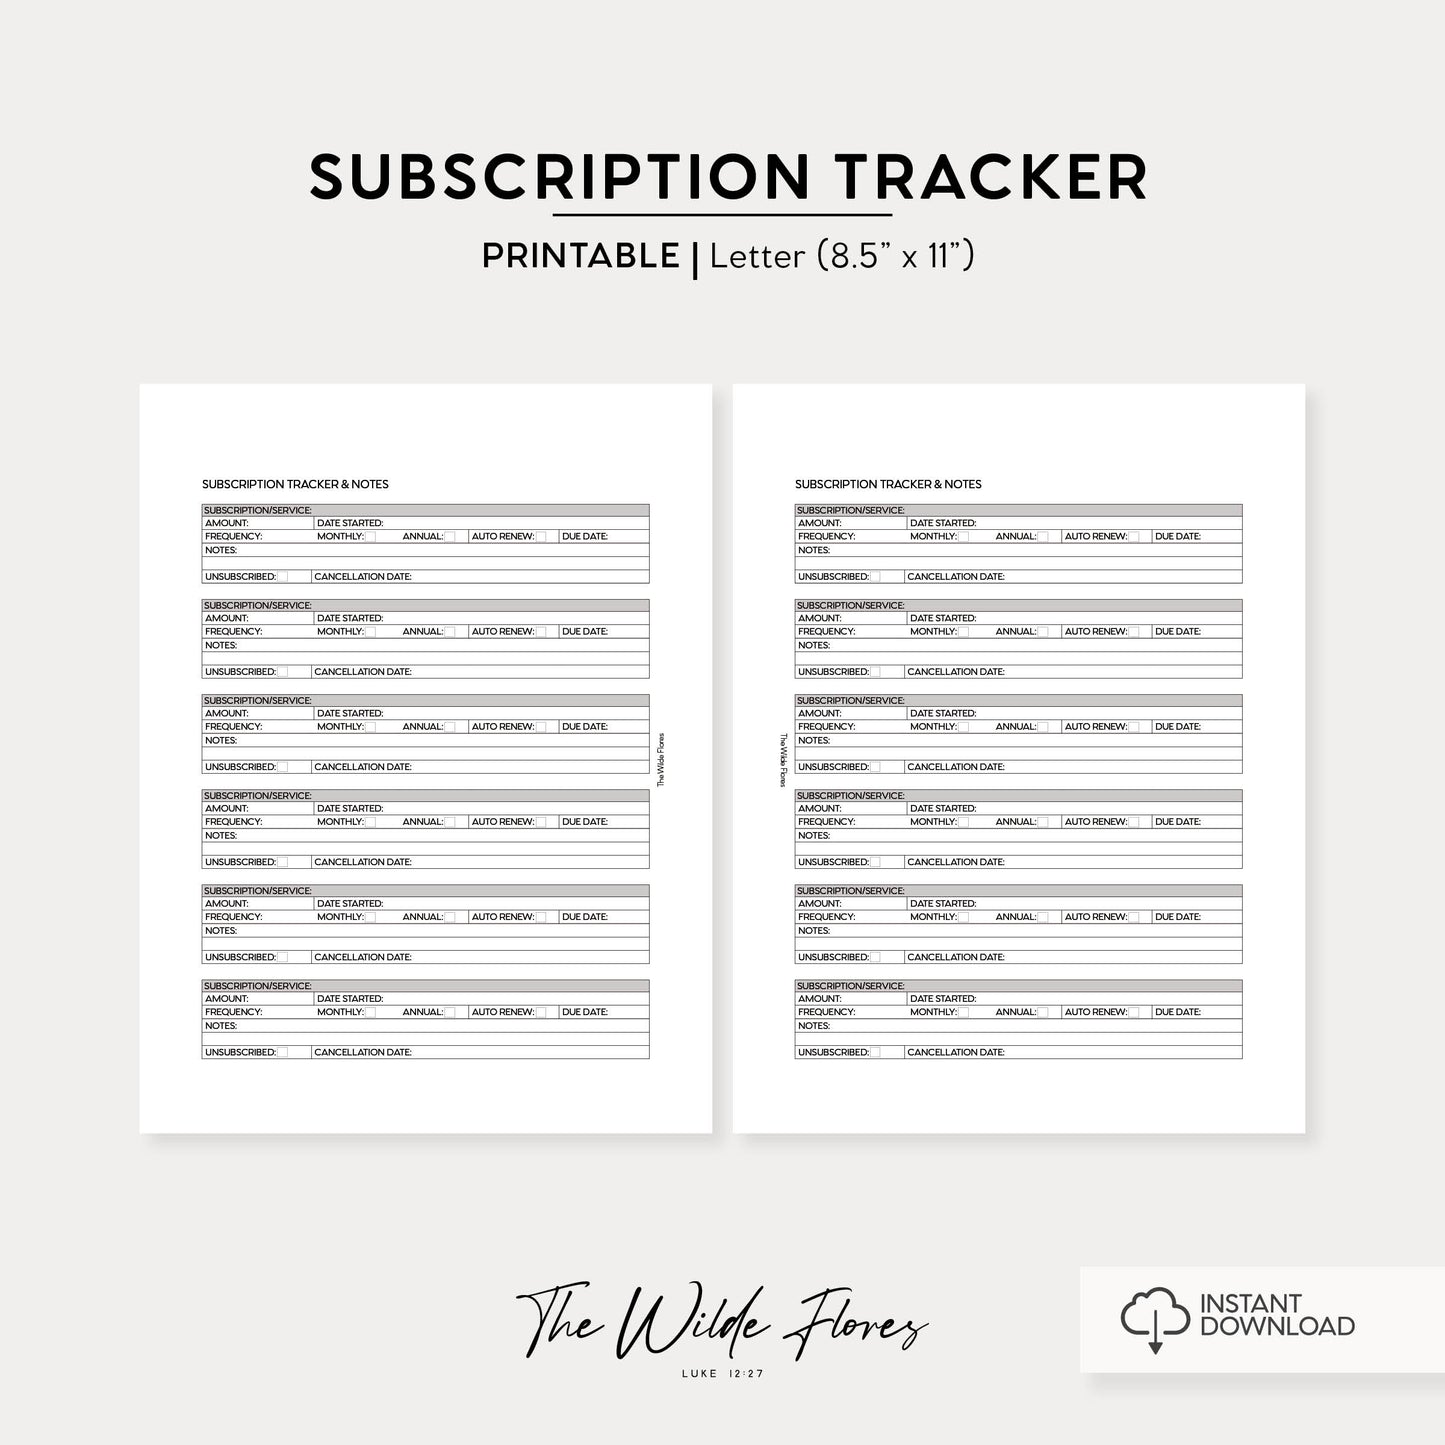 Subscription Tracker: Letter Size Printable